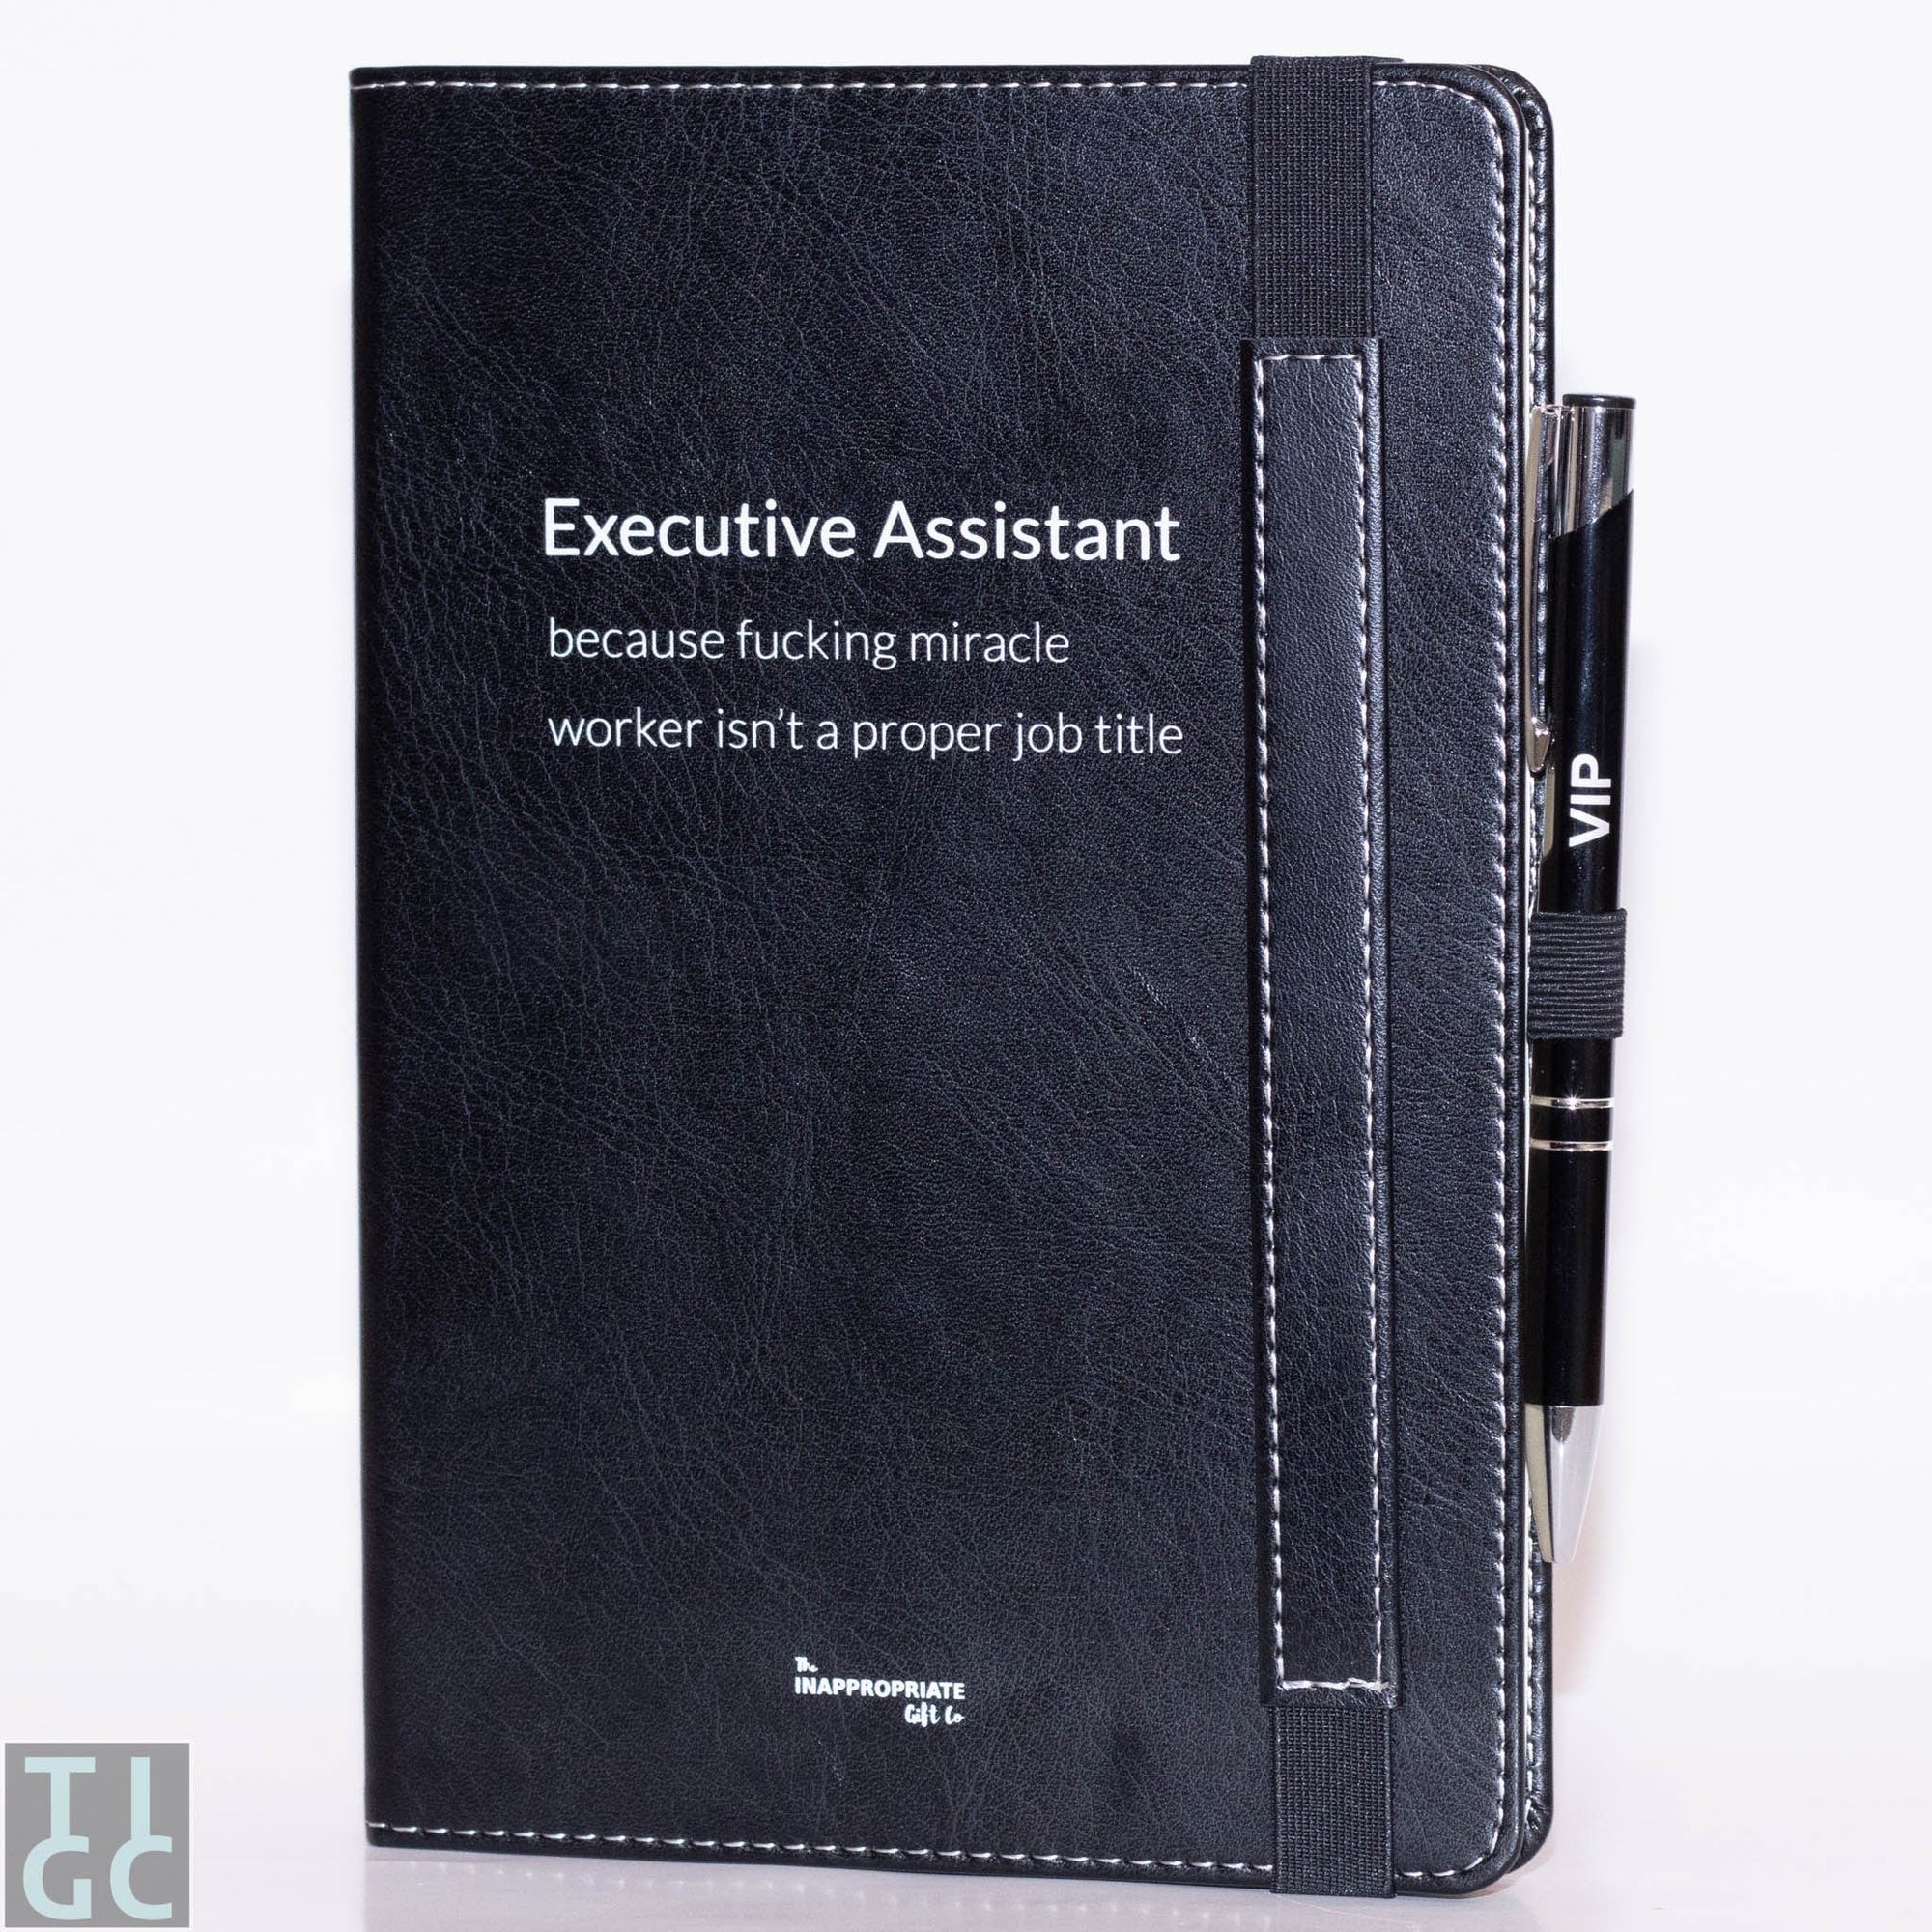 TIGC The Inappropriate Gift Co Executive Assistant Notebook and Pen Combo